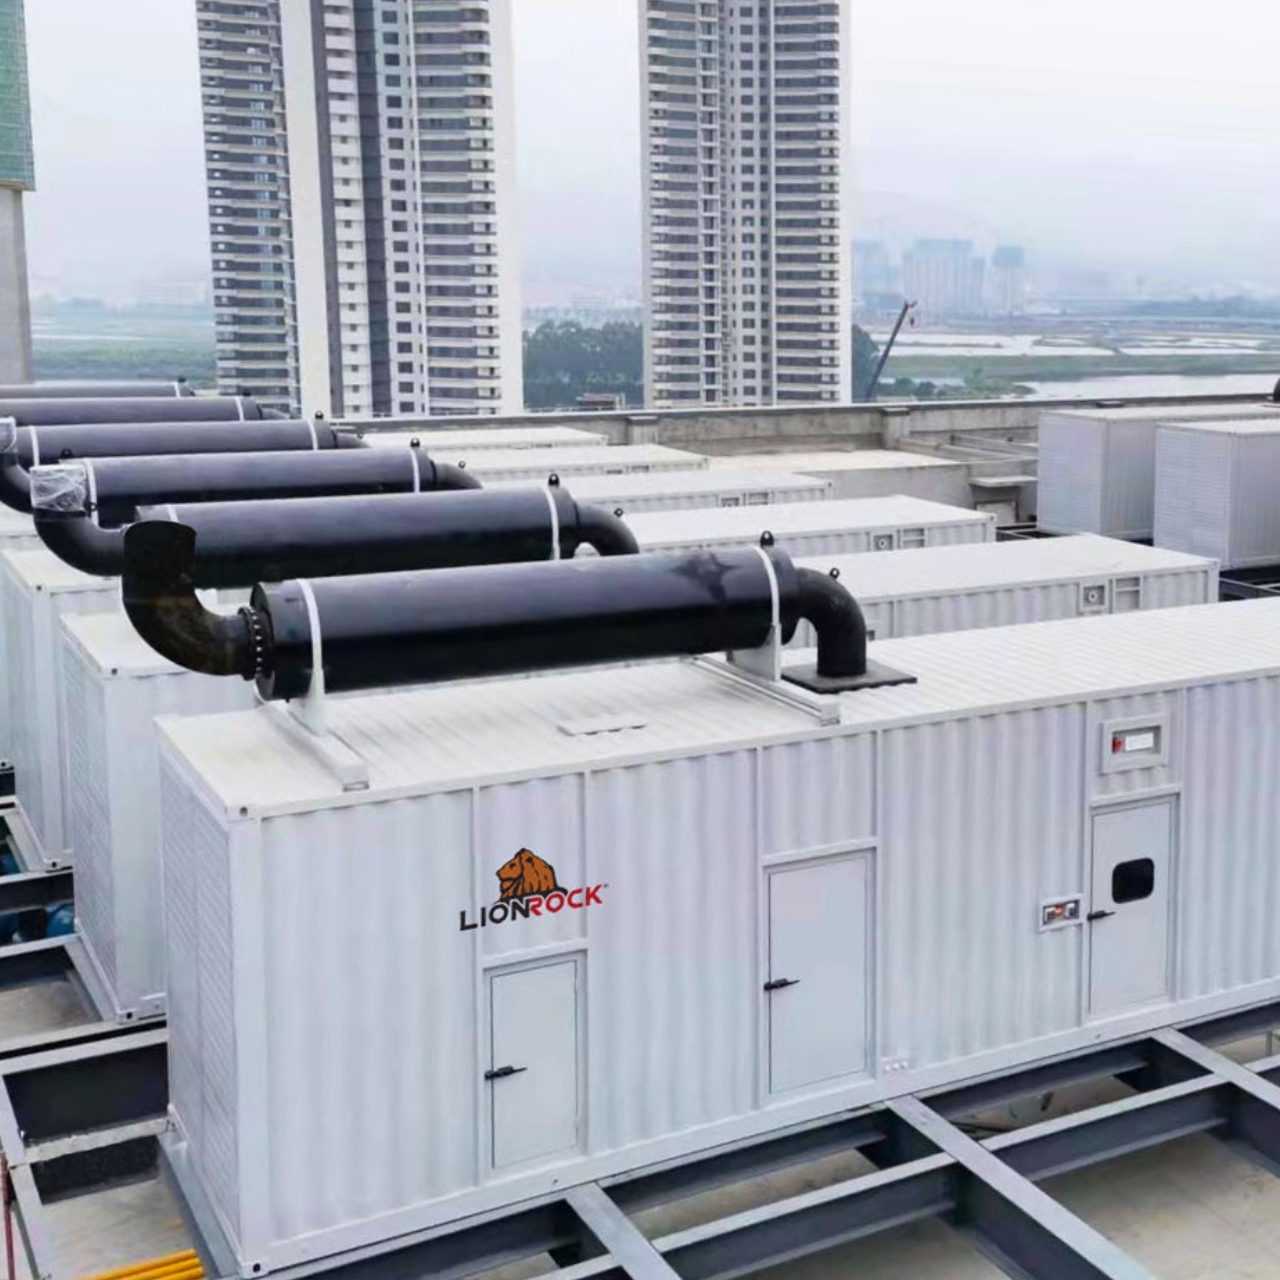 LionRock Containerized Generator Set for ZTE in Heyuan, China,Projects,NEWS,3TECH